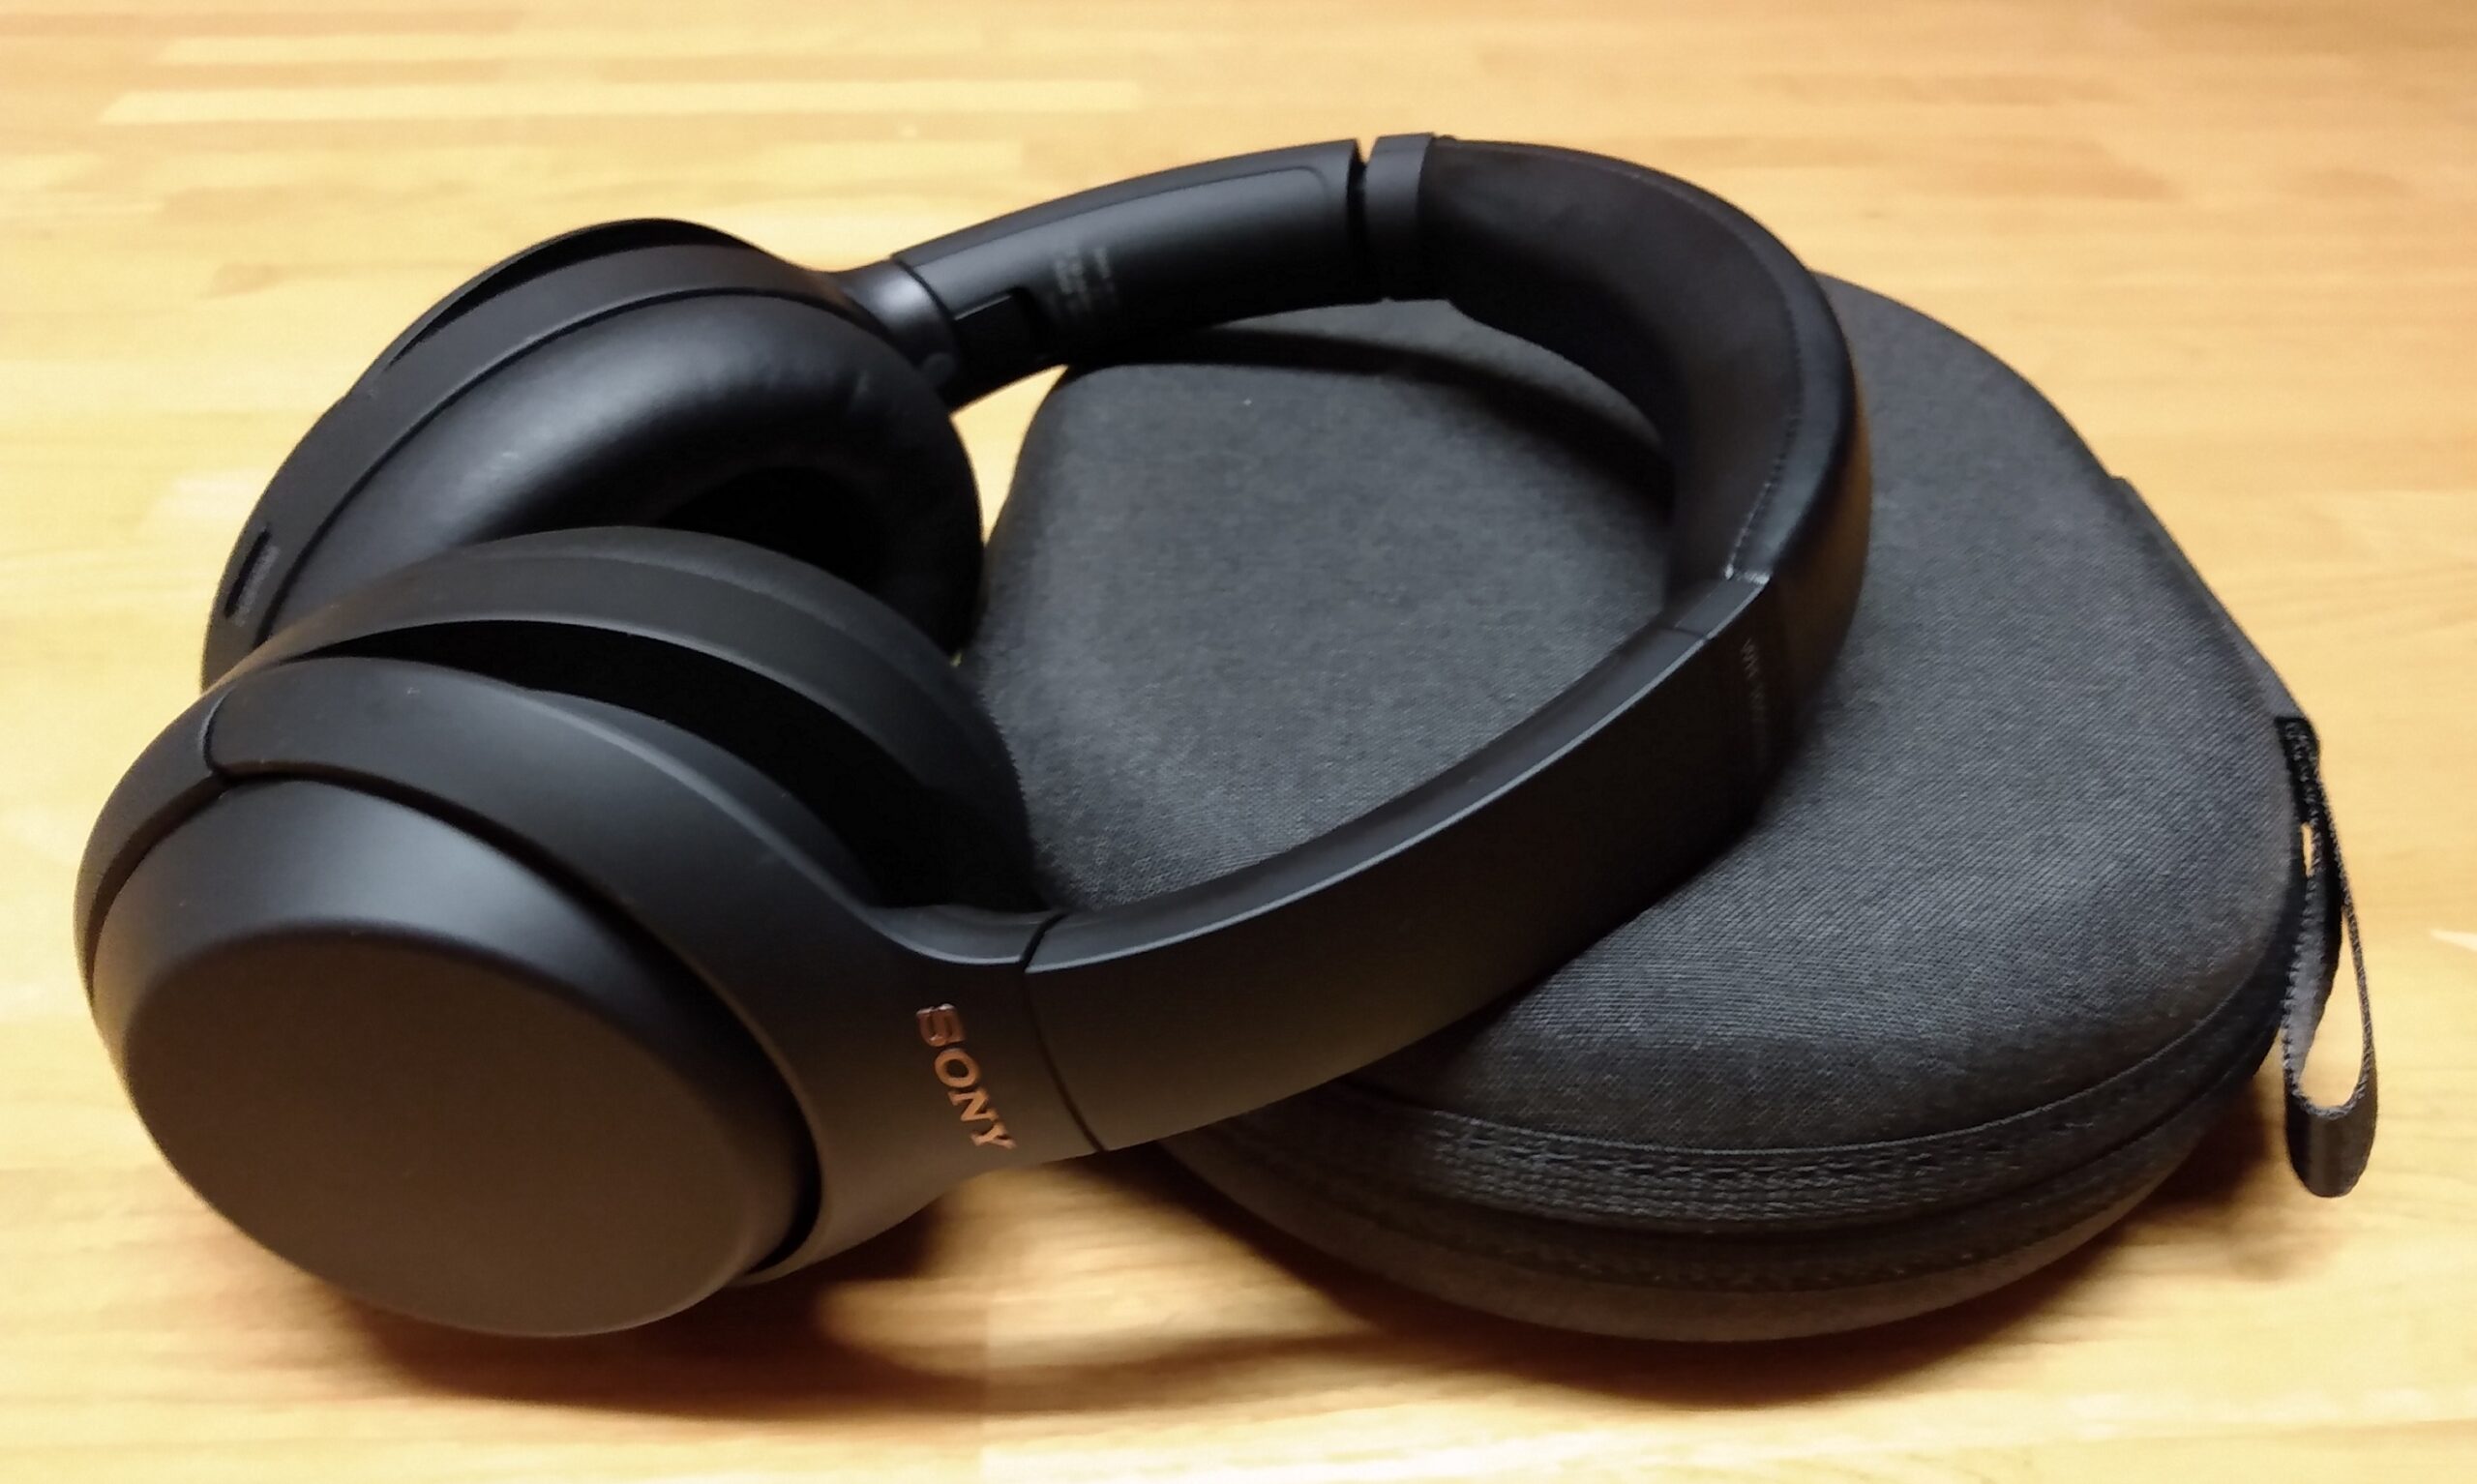 Sony WH-1000XM4 noise cancelling headphones review | Best Buy Blog